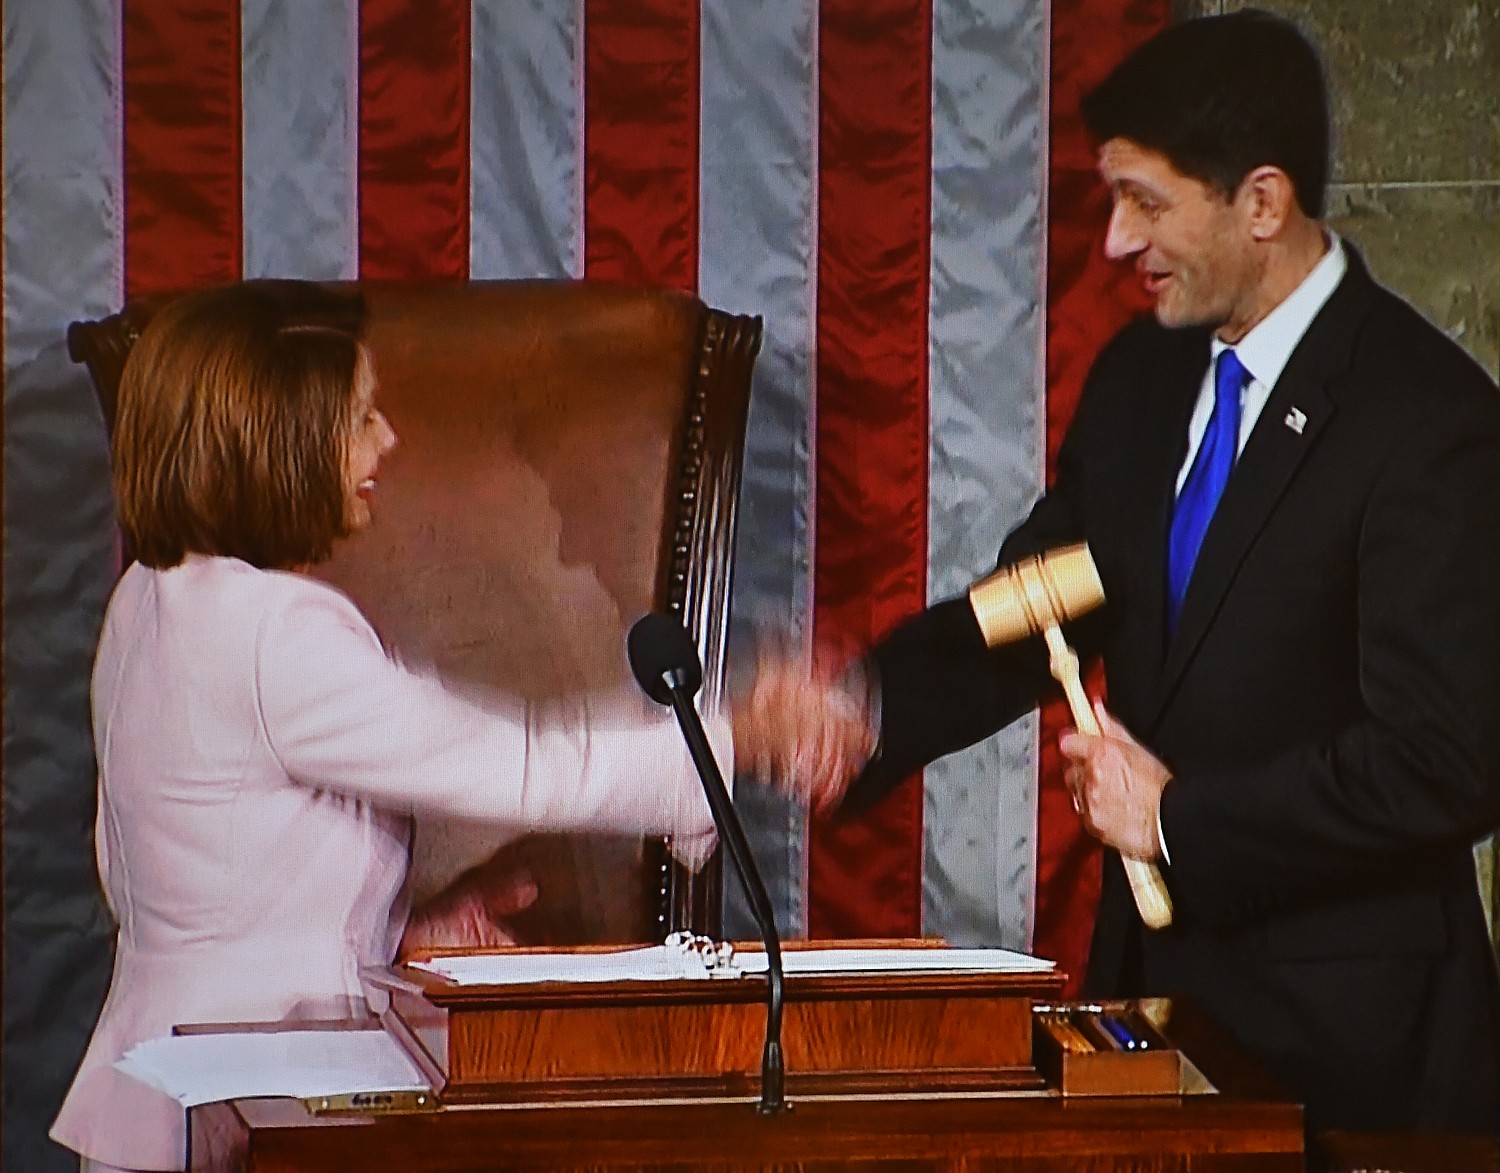 Minority Leader Nancy Pelosi passes gavel to Speaker of the House Paul Ryan at the opening of the 115th Congress © 2017 Karen Rubin/news-photos-features.com